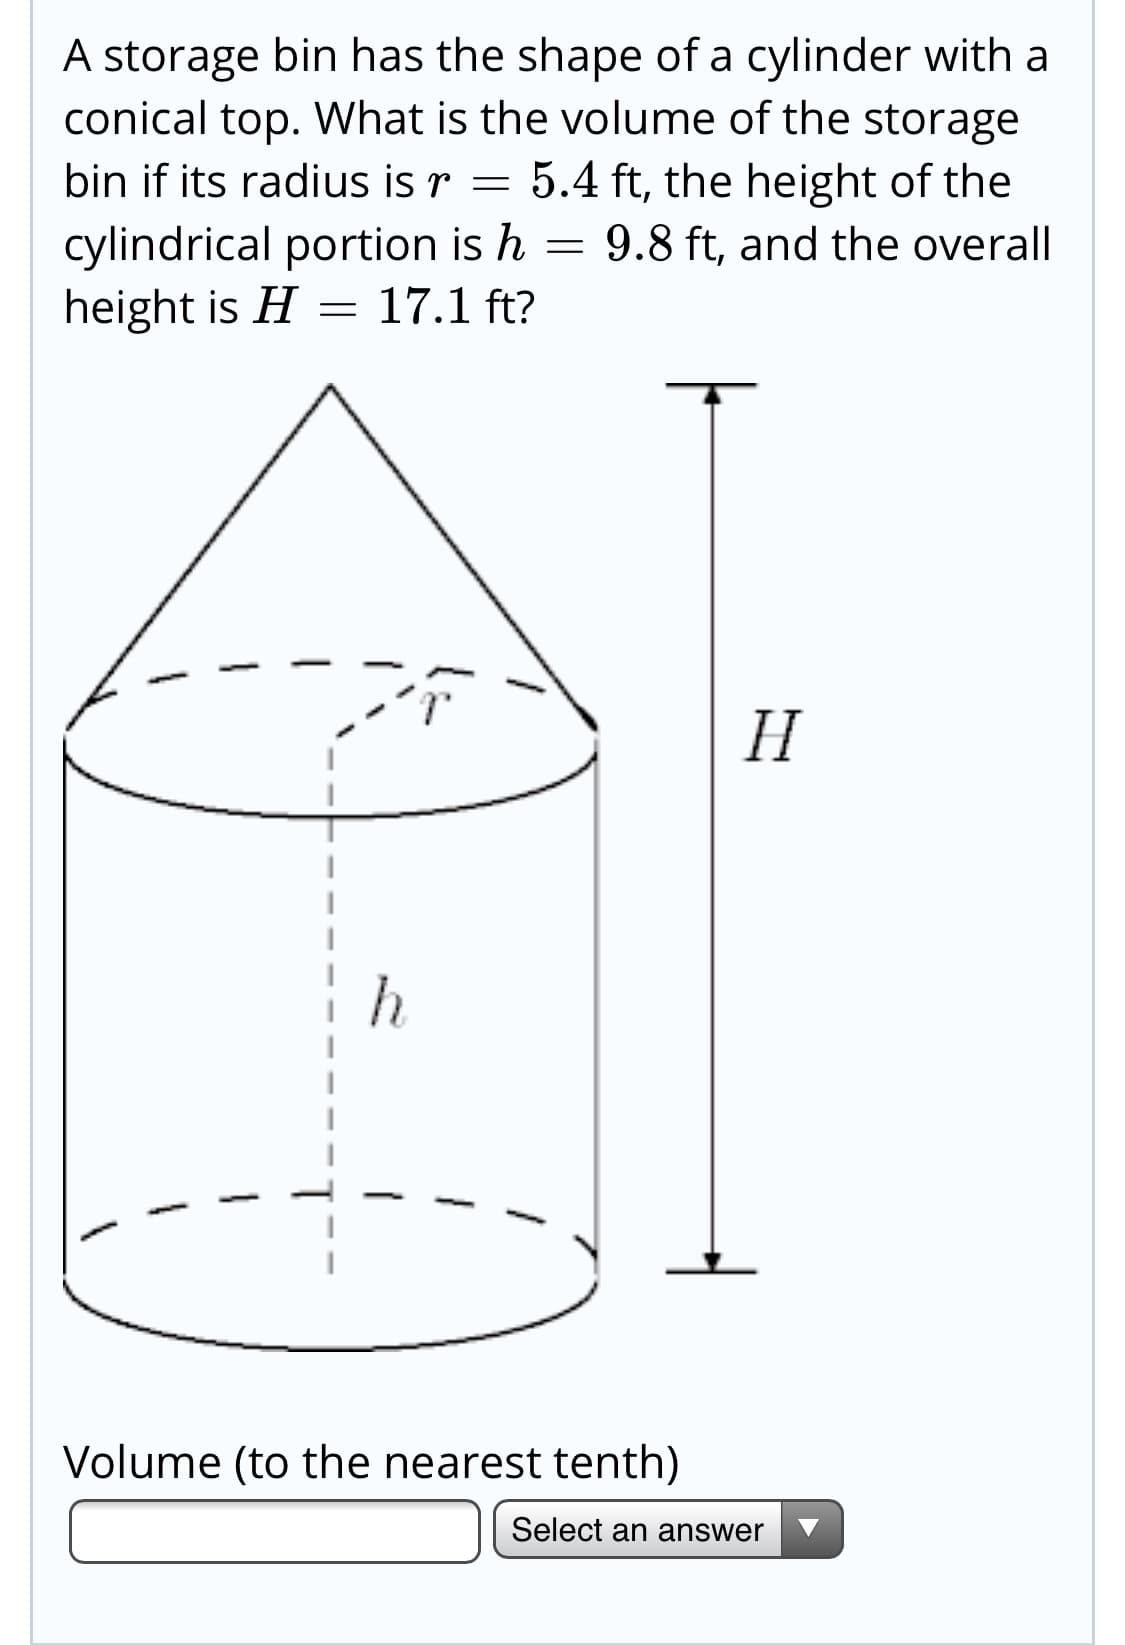 A storage bin has the shape of a cylinder with a
conical top. What is the volume of the storage
bin if its radius is r = 5.4 ft, the height of the
cylindrical portion is h = 9.8 ft, and the overall
height is H = 17.1 ft?
